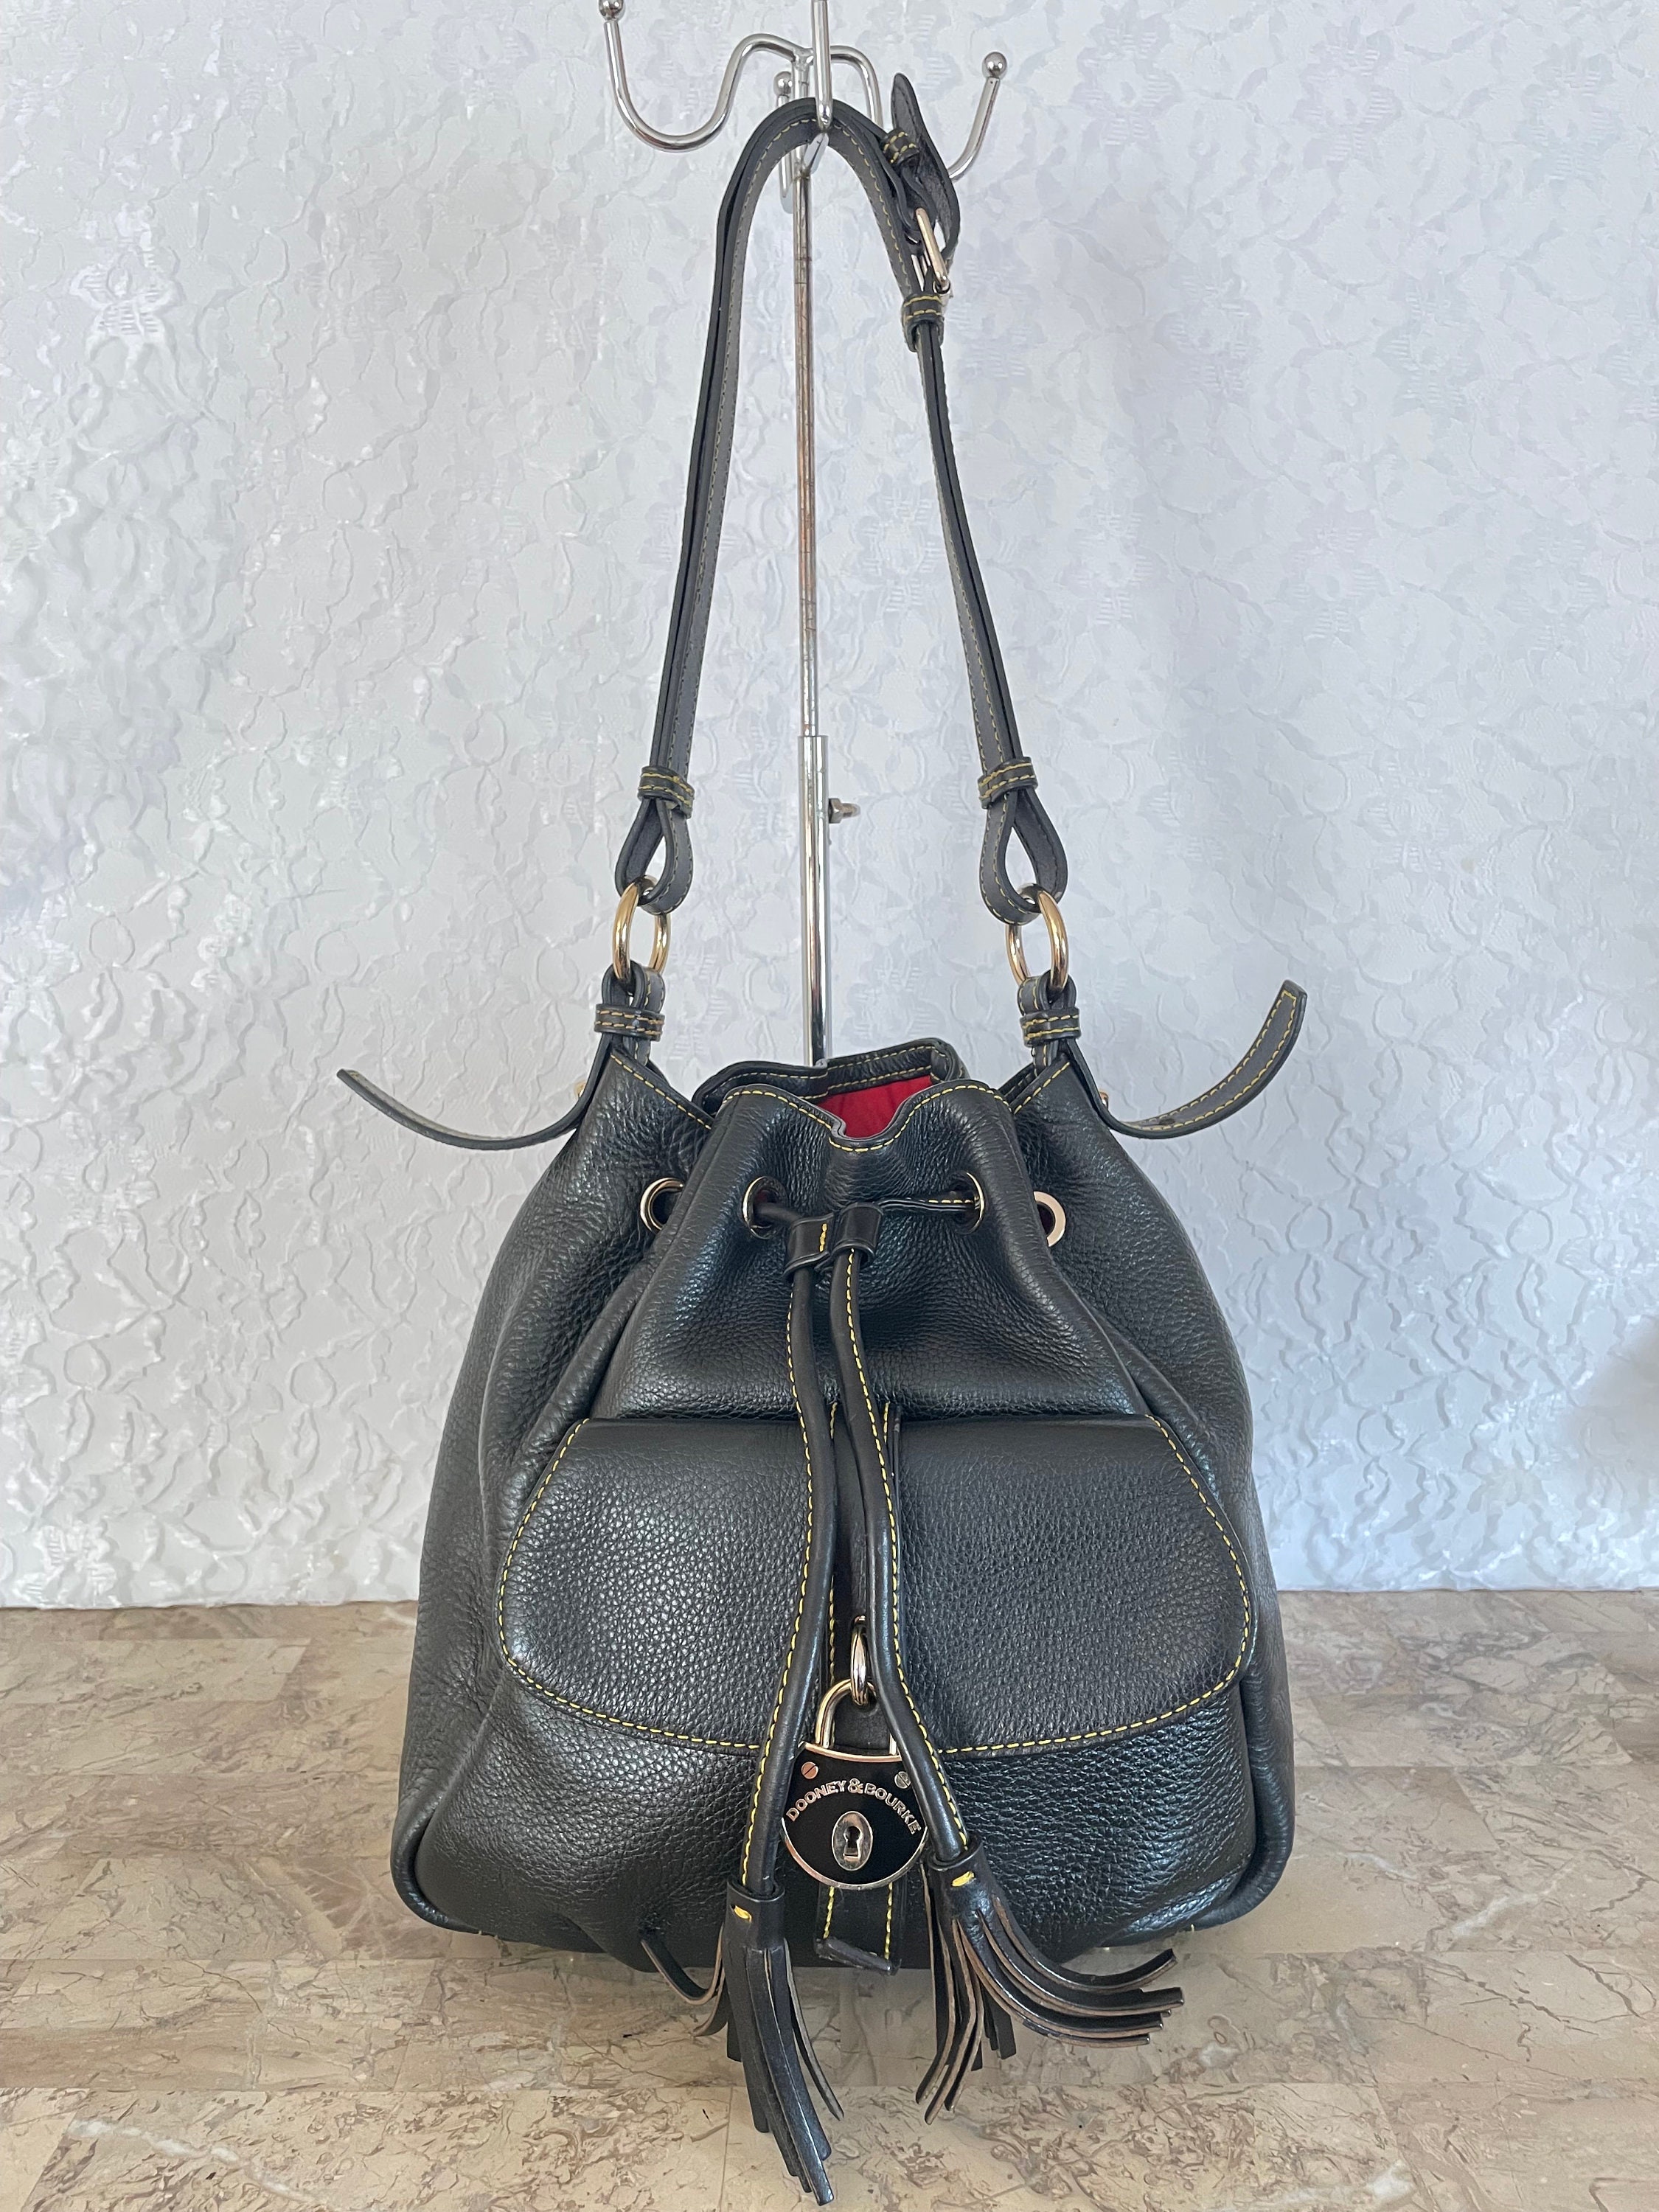 Drawstring bucket bag in palm leaf and calfskin & Dumbo octopus charm in  resin and classic calfskin